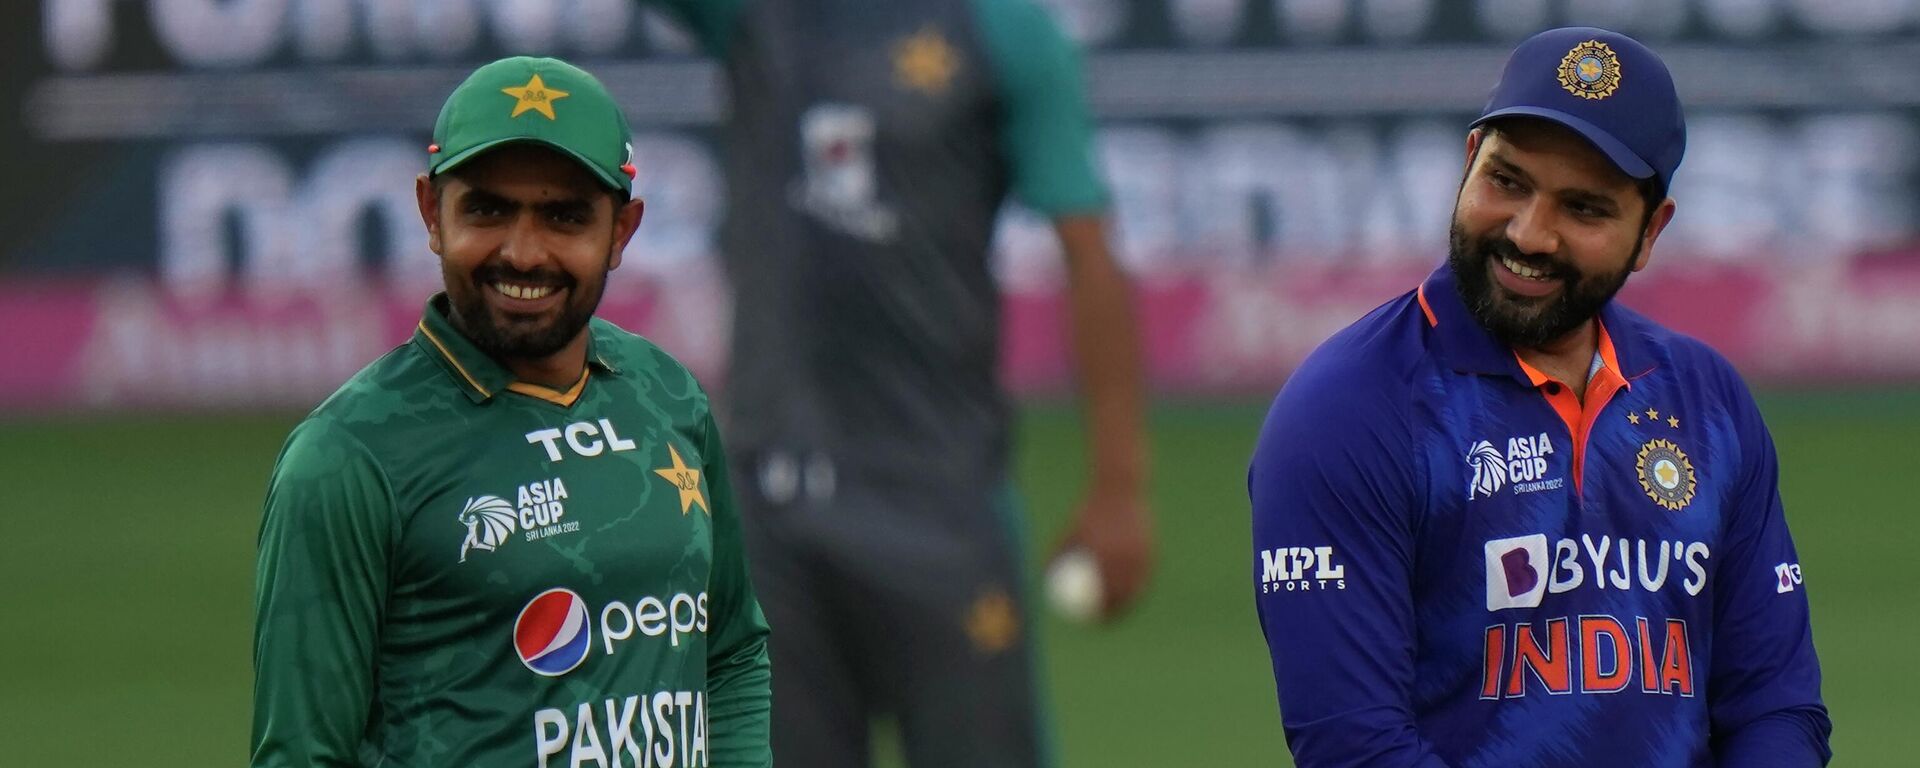 Pakistan's captain Babar Azam, left, and India's captain Rohit Sharma smile as they wait for the toss ahead of the T20 cricket match of Asia Cup between India and Pakistan, in Dubai, United Arab Emirates, Sunday, Sept. 4, 2022. - Sputnik India, 1920, 11.09.2023